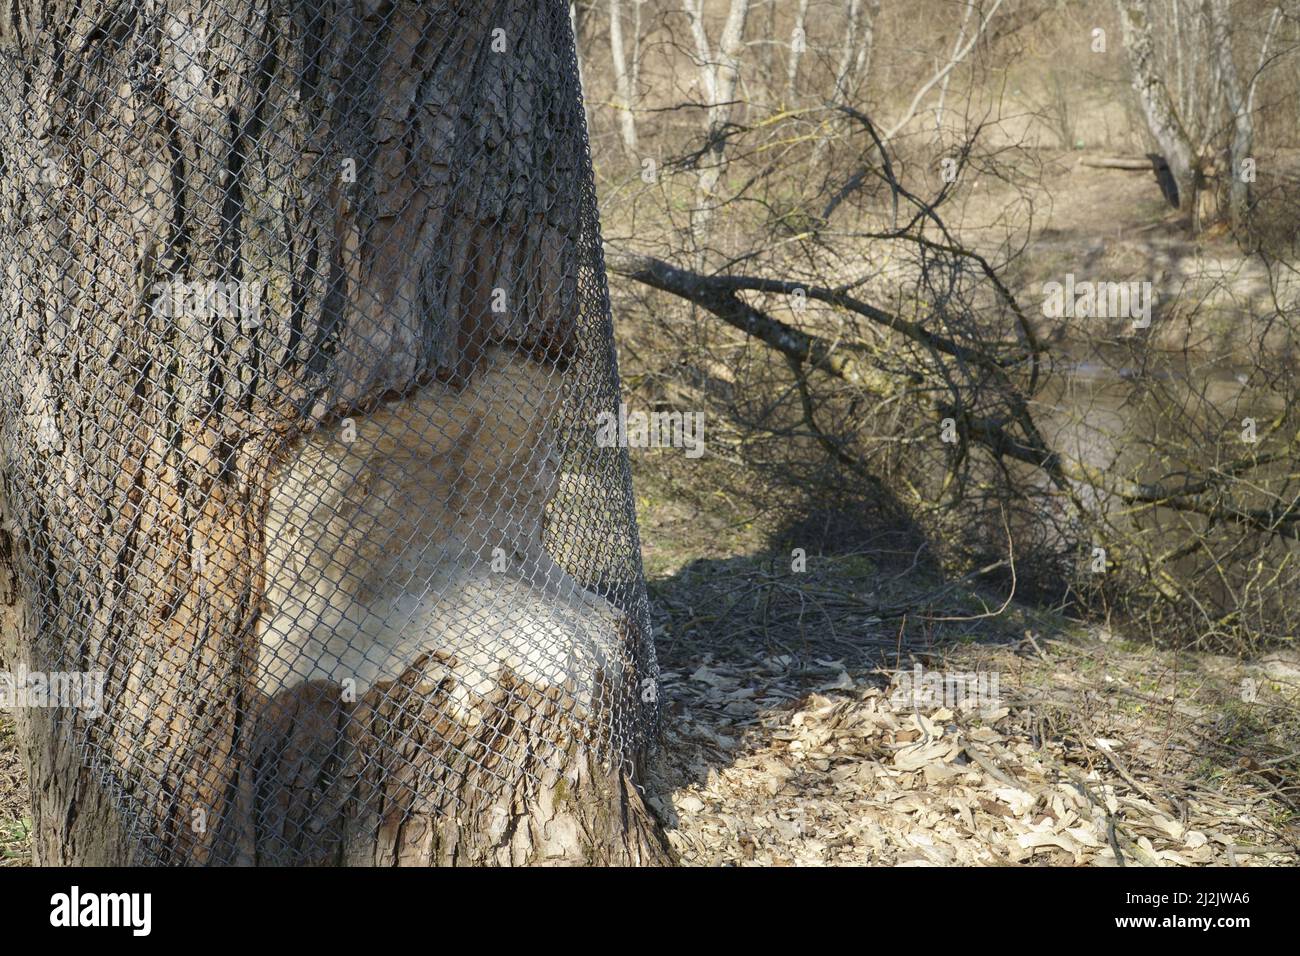 Damage to a tree in the wild park, caused by a beaver. Protection of the tree trunk against damage by rodent animals by covering it with a metal mesh. Stock Photo